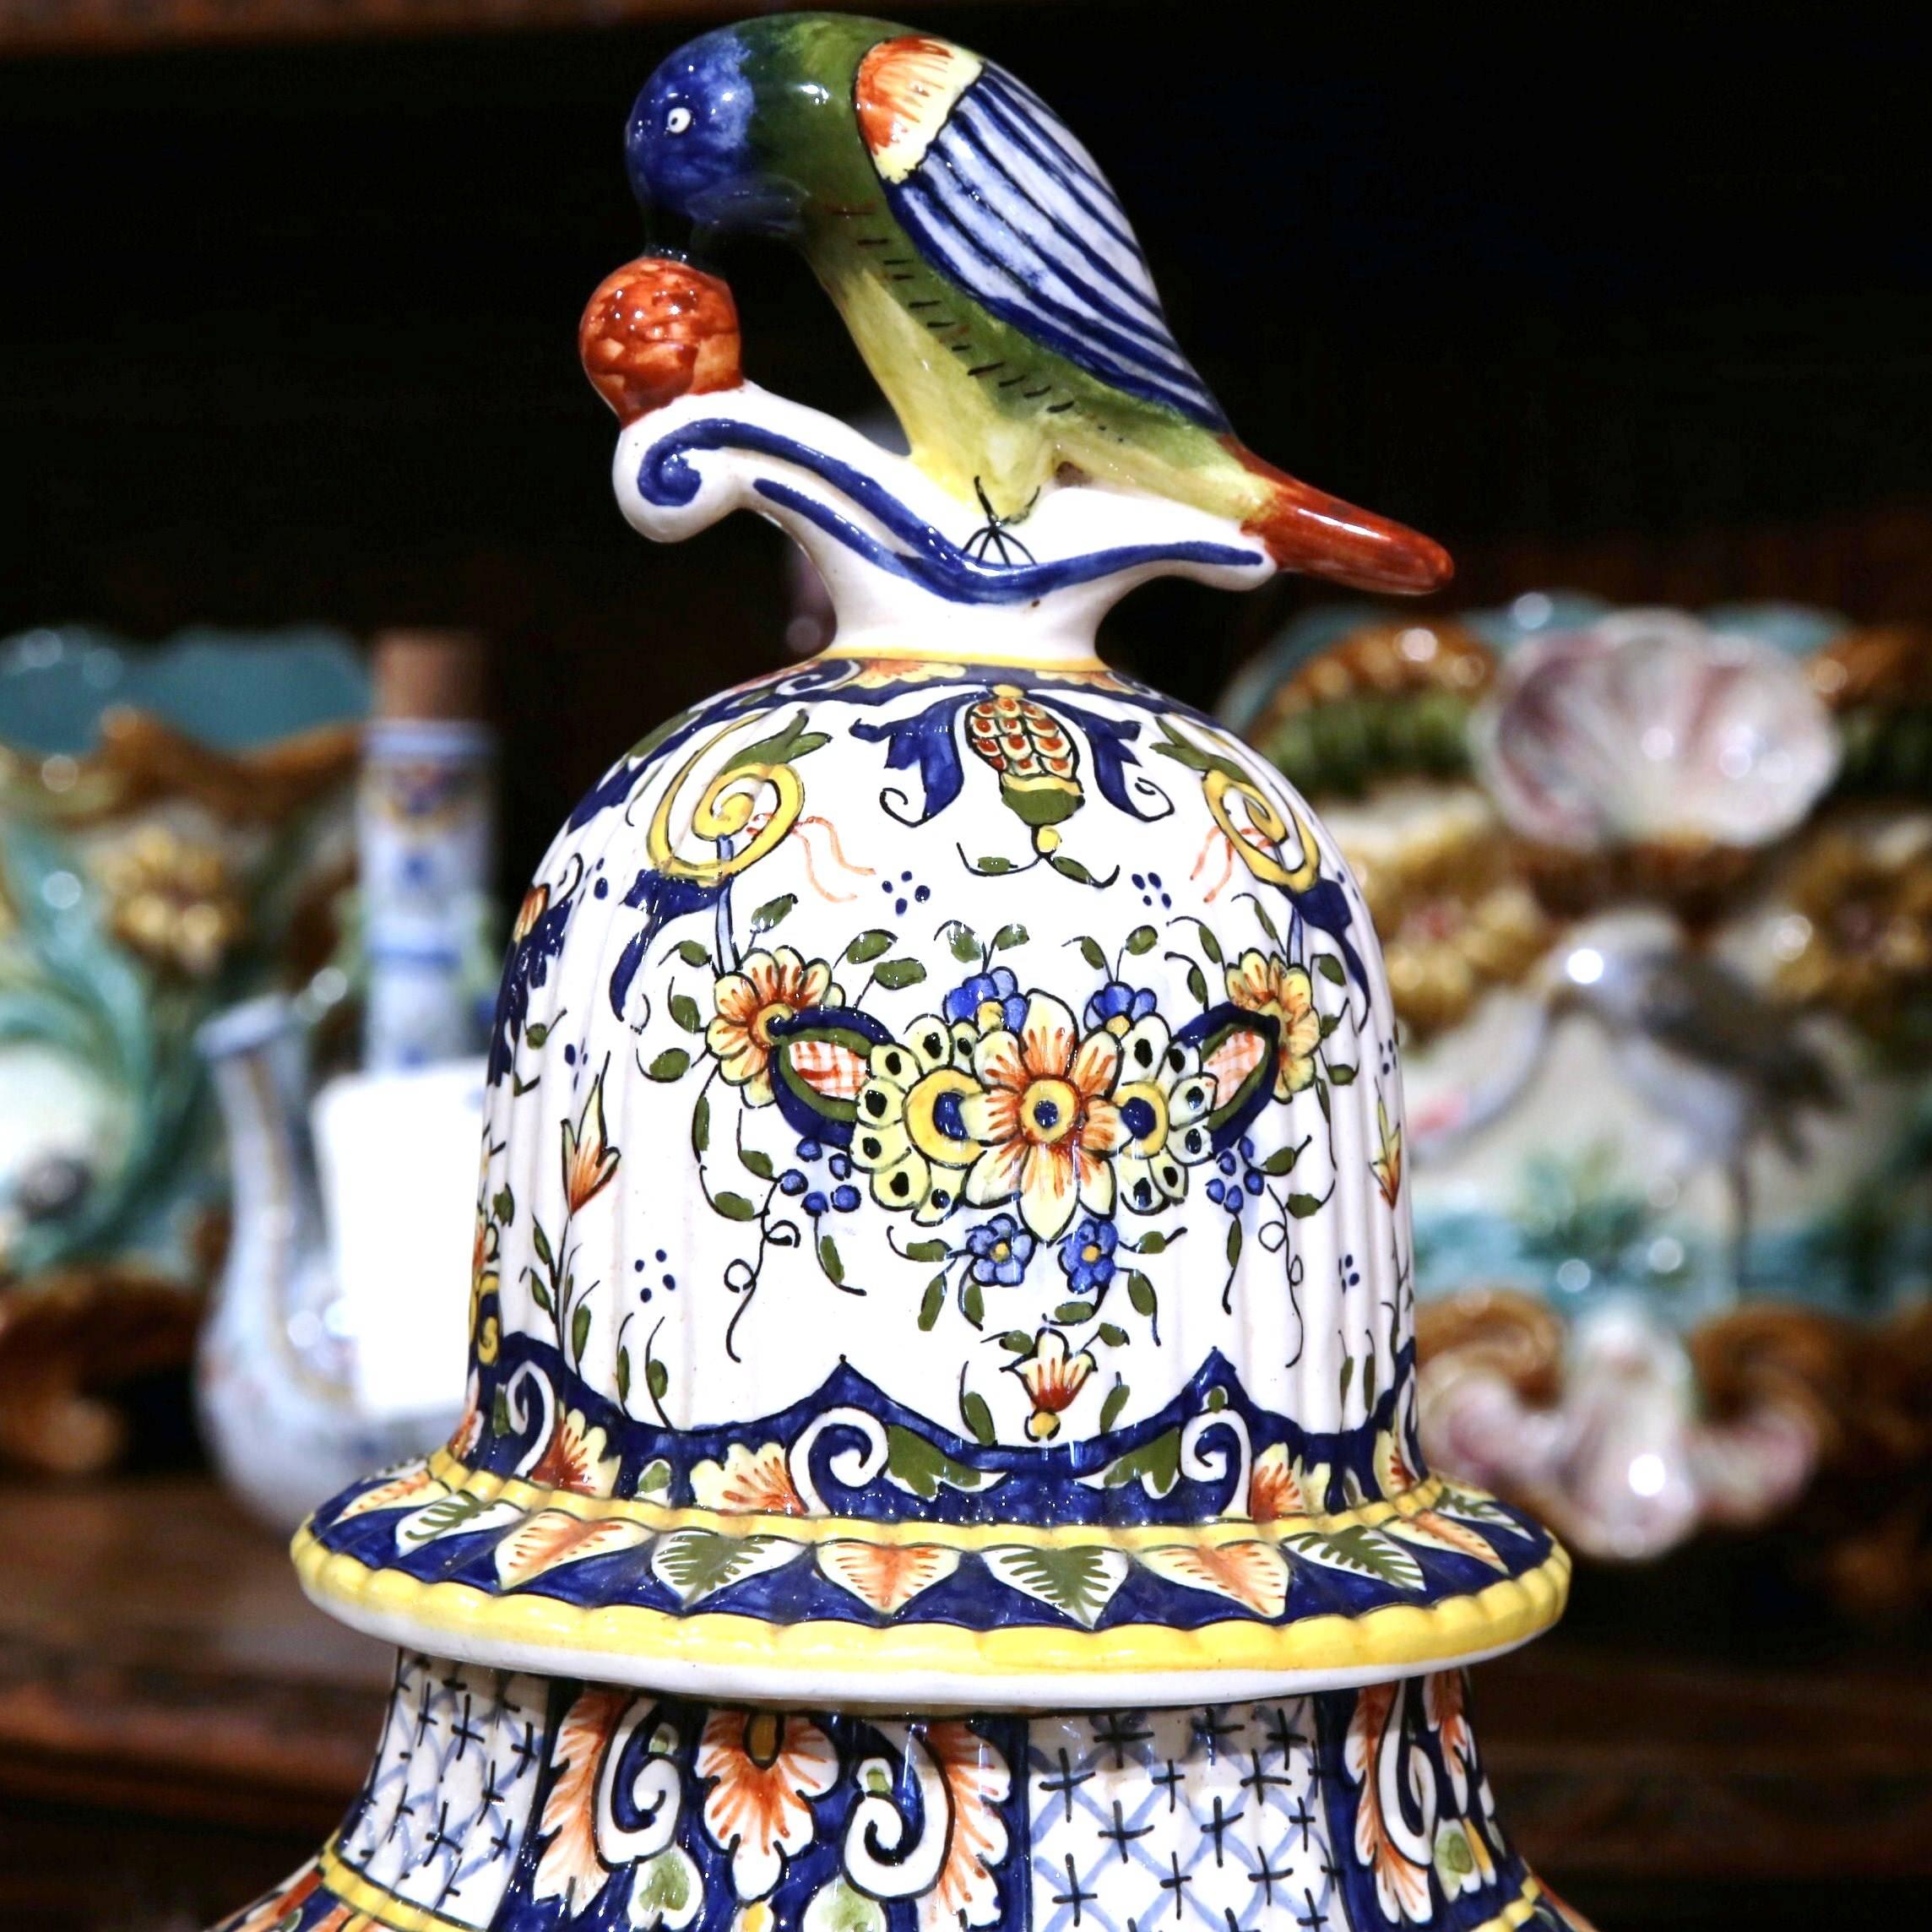 This large, colorful, hand-painted potiche with lid was sculpted in Normandy, France. The tall antique vase features rich colors with floral motifs in a blue, red and yellow palette on a white background. The lid has a parrot pecking at a cherry,